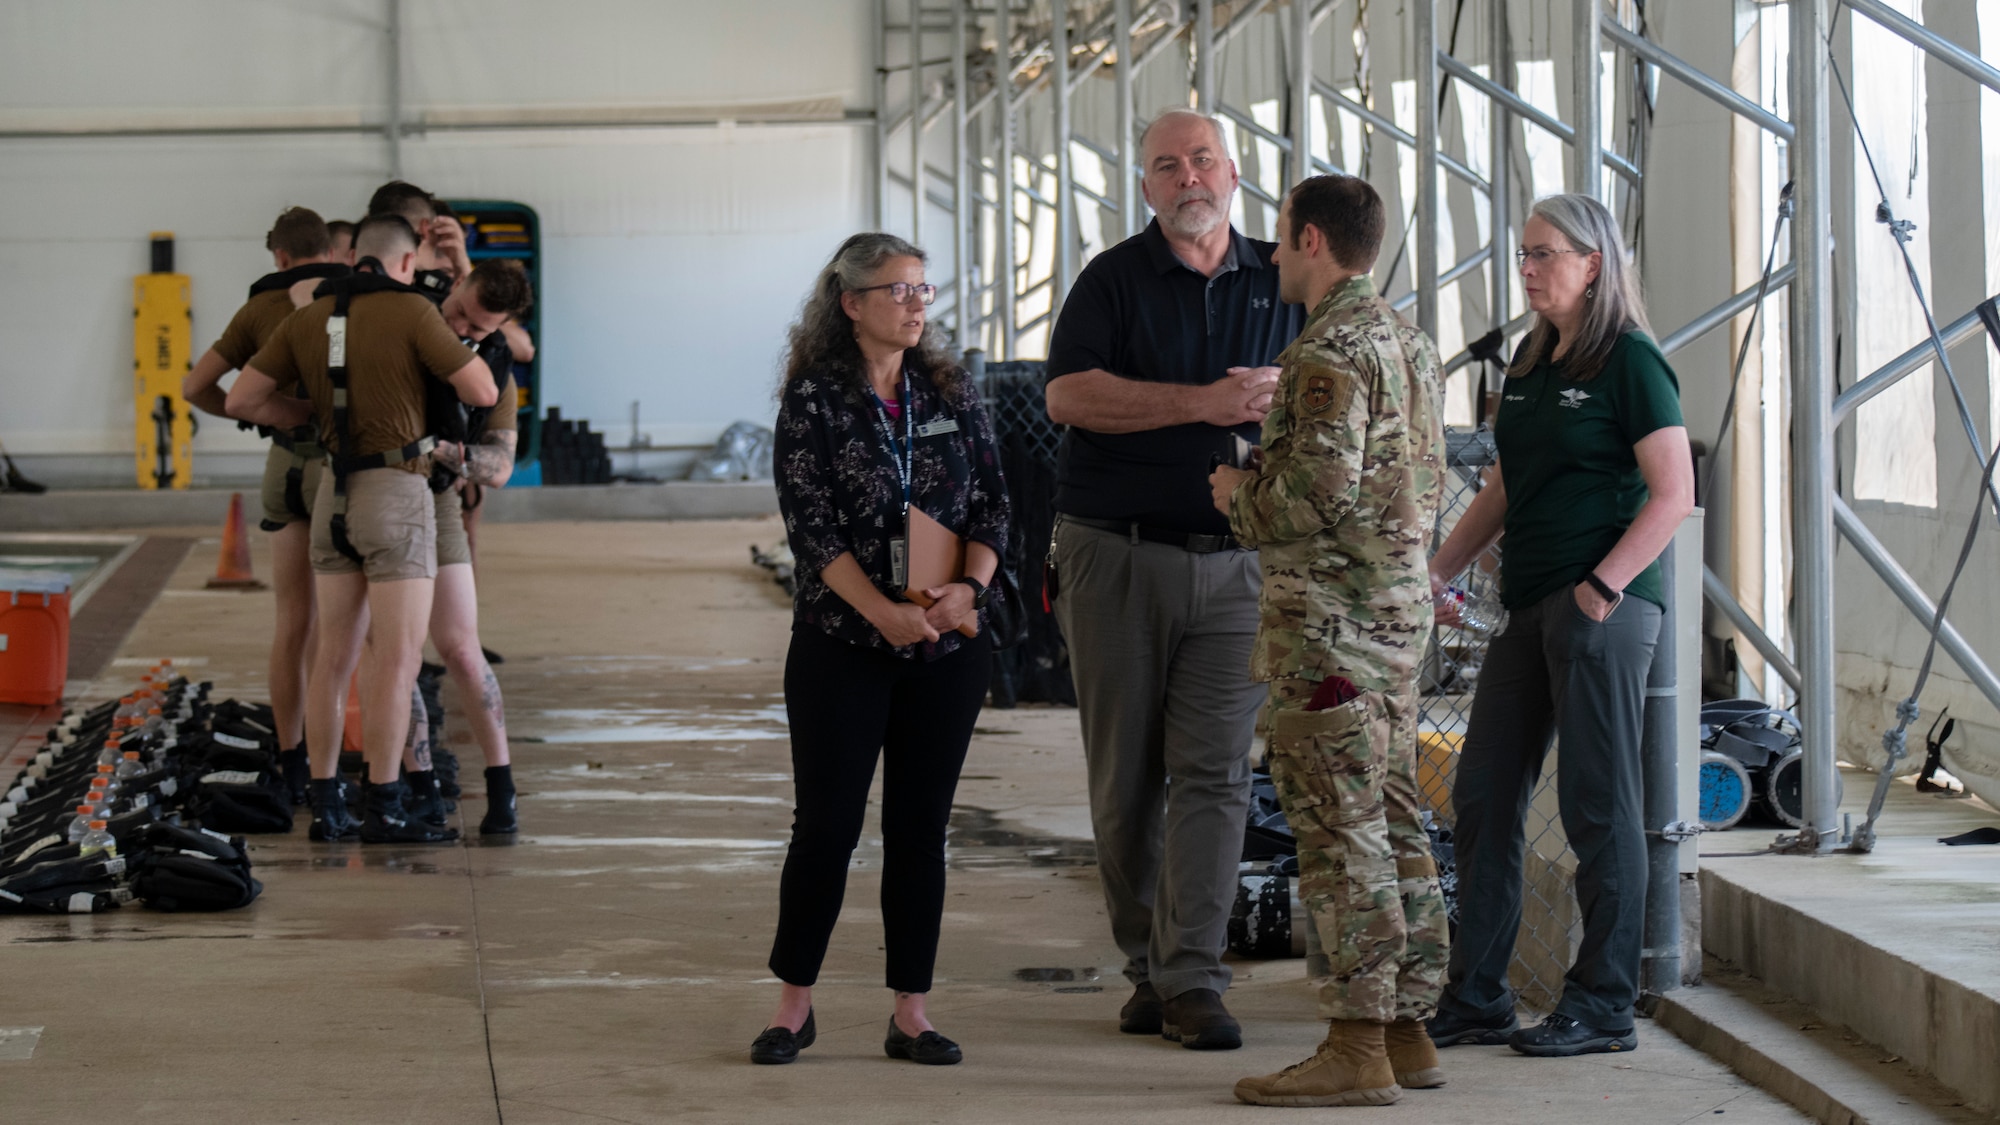 Dr. Wendy Walsh (near center), Air Education and Training Command chief learning officer, and Dr. Brian Davis (third from right), Second Air Force chief training officer, observe the Special Warfare Training Wing Pre-Dive Course with Maj. Kevin Epstein (second from right), 350th Special Warfare Training Squadron commander, and Dr. Karal Garcia (far right), Special Warfare Training Group training advisor, at Chaparral Pool on Joint Base San Antonio-Lackland, Texas, April 5, 2022. Walsh and her team participated in an immersion tour of the SWTW to learn about how the SWTW builds Air Force Special Warfare Airmen and prepares them for combat.